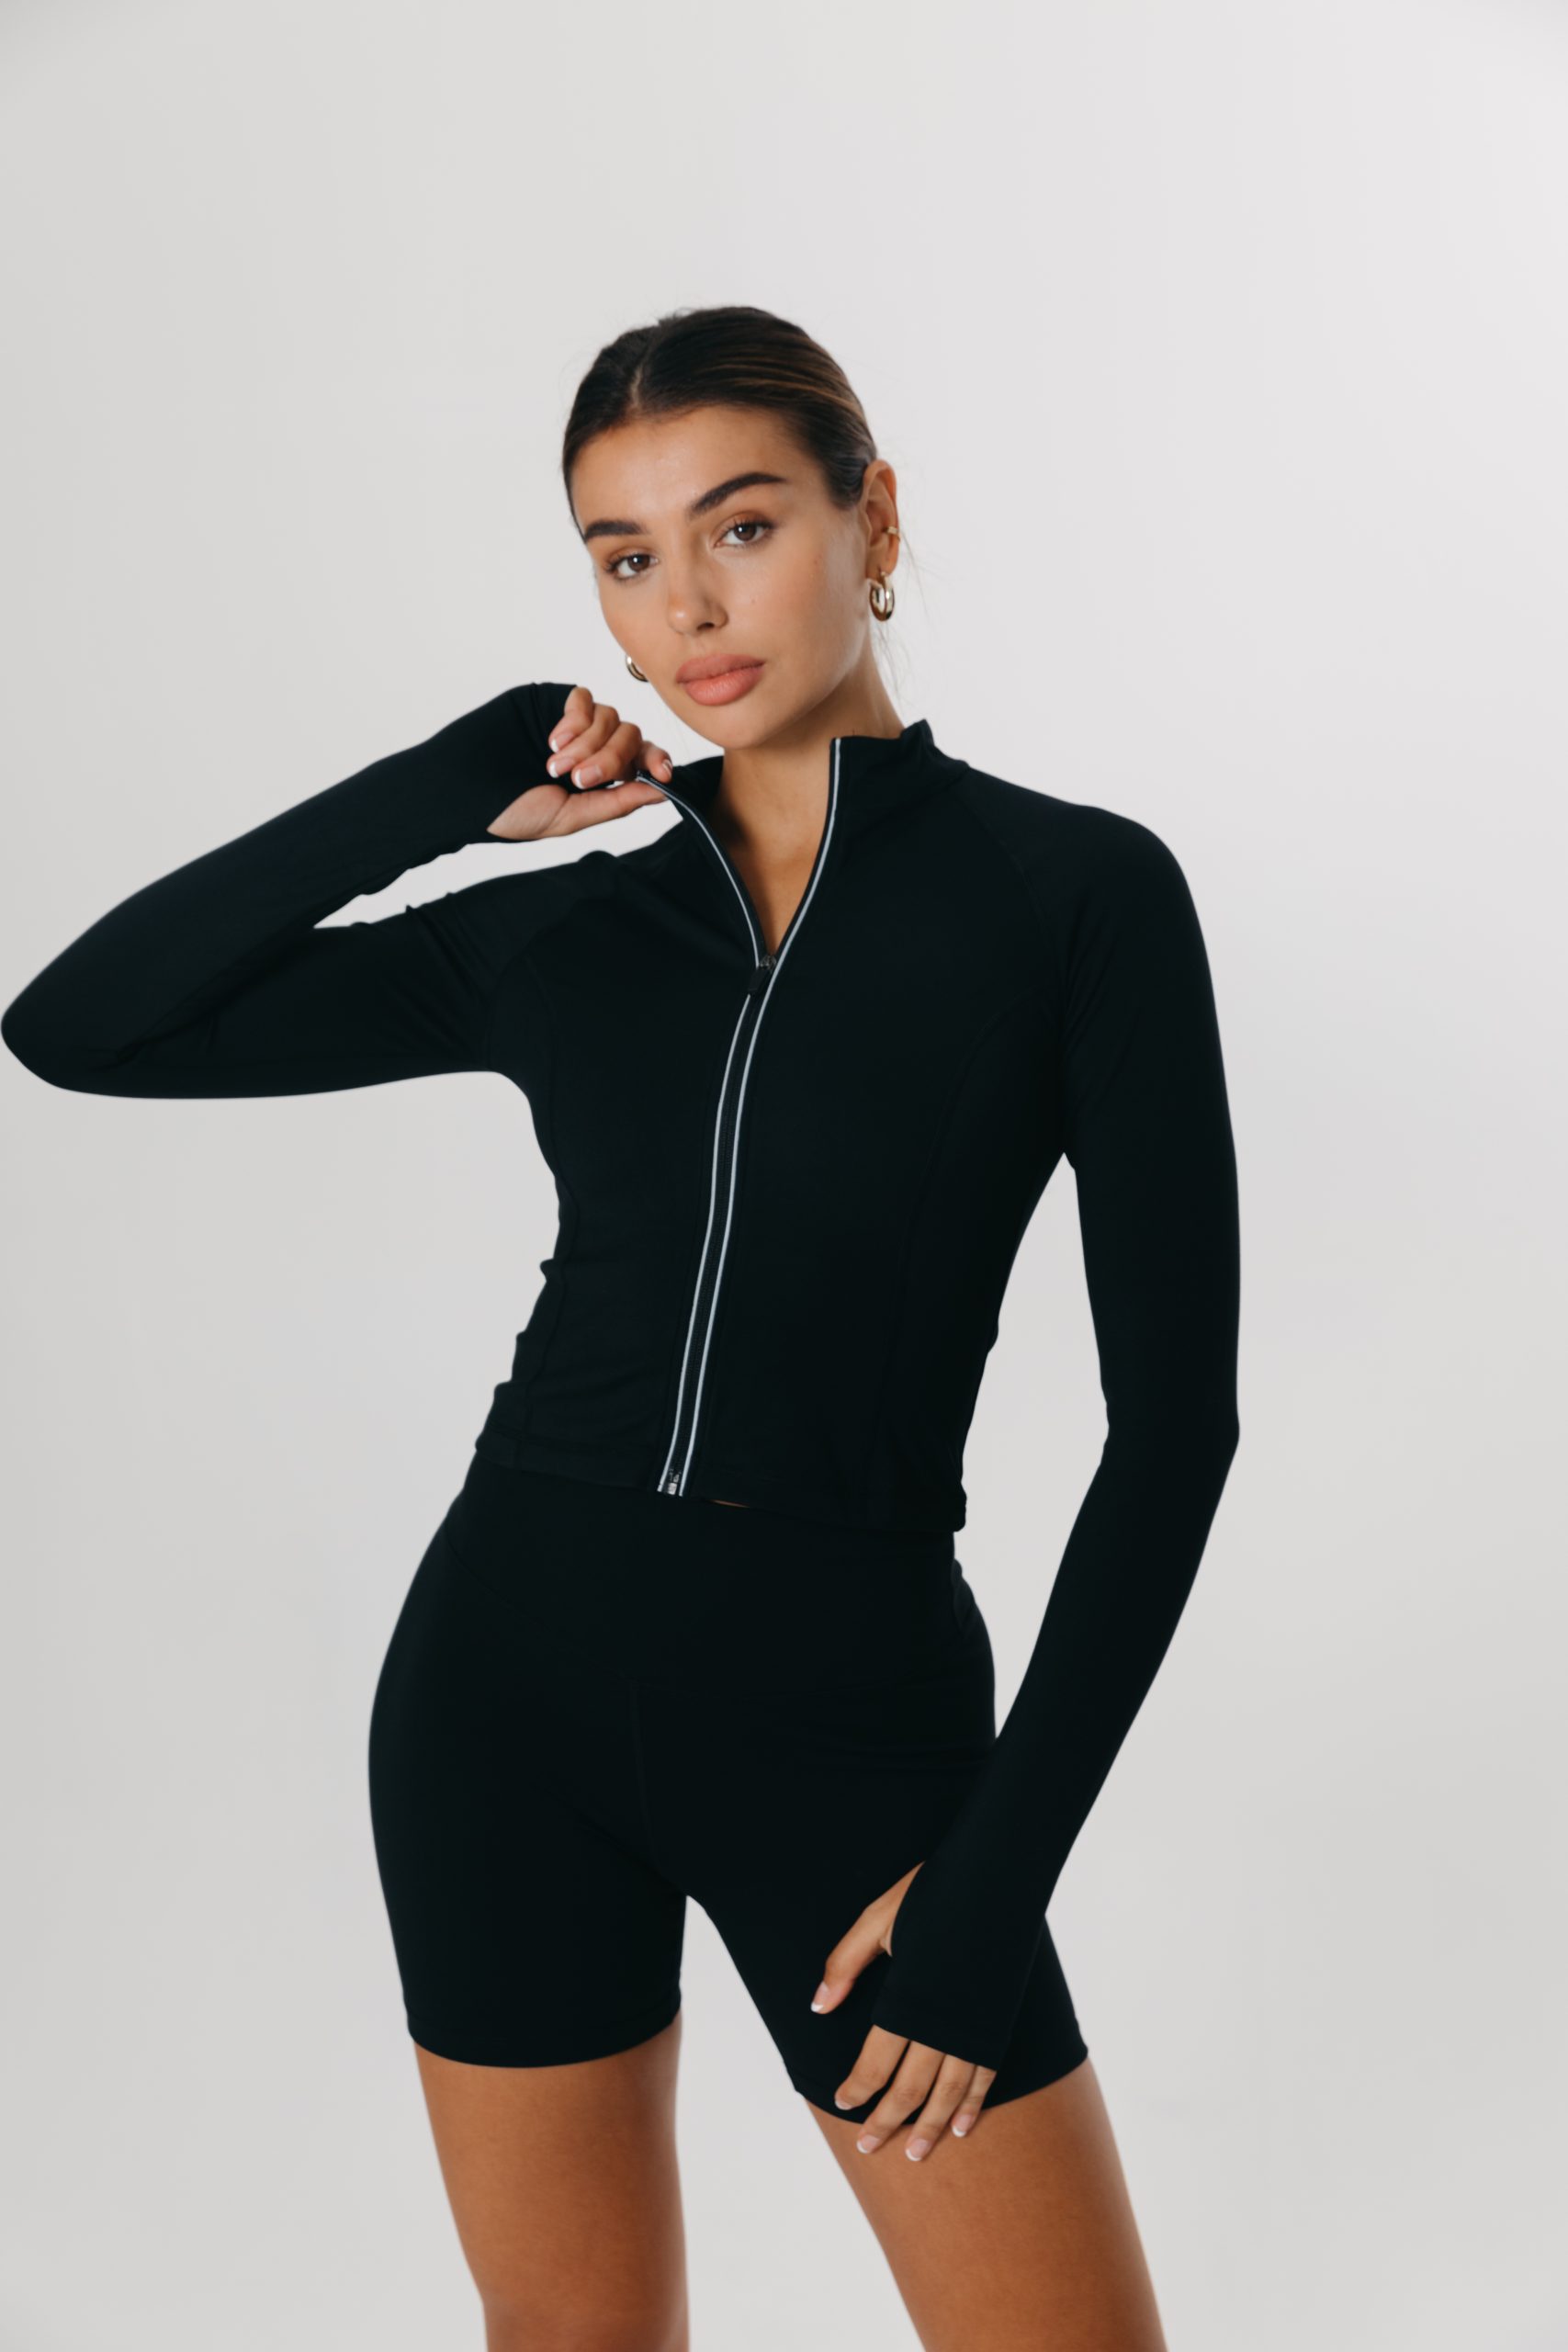 A young woman modelling a black outfit from TALA's activewear collection